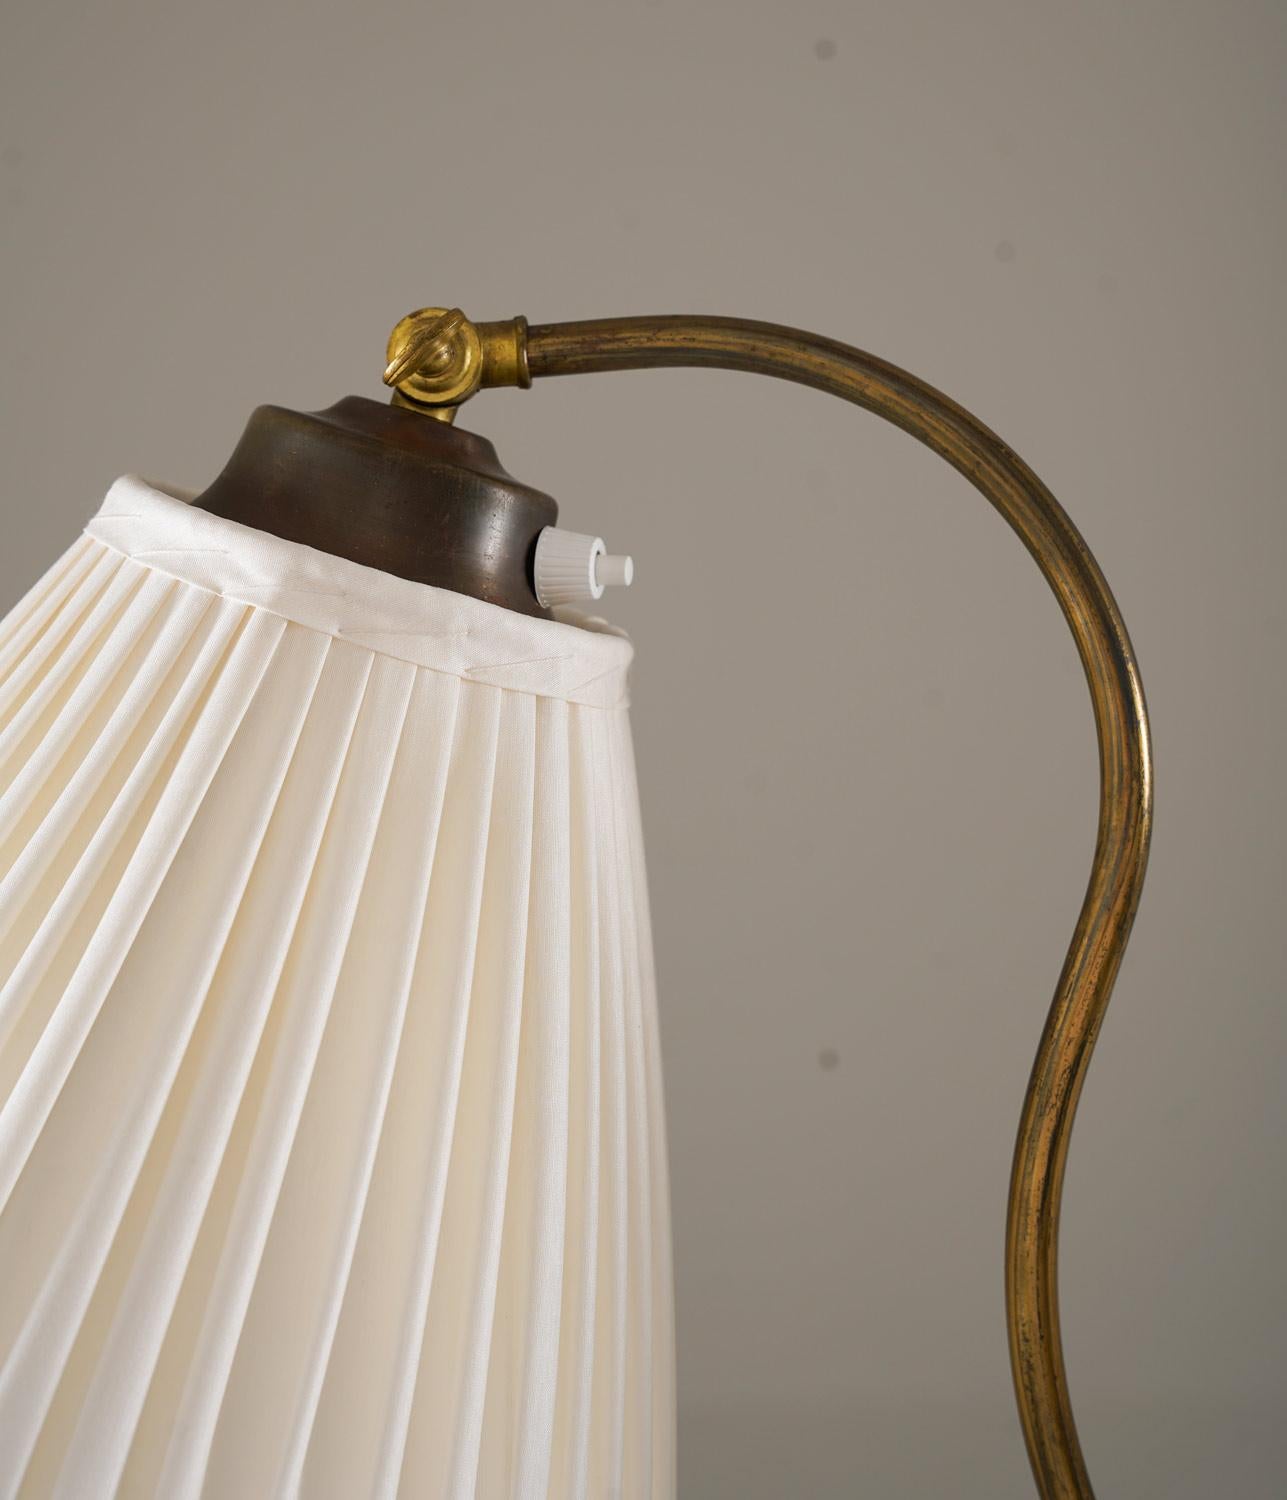 Swedish Modern Floor Lamp in Brass, by Corona, 1940s In Good Condition For Sale In Karlstad, SE